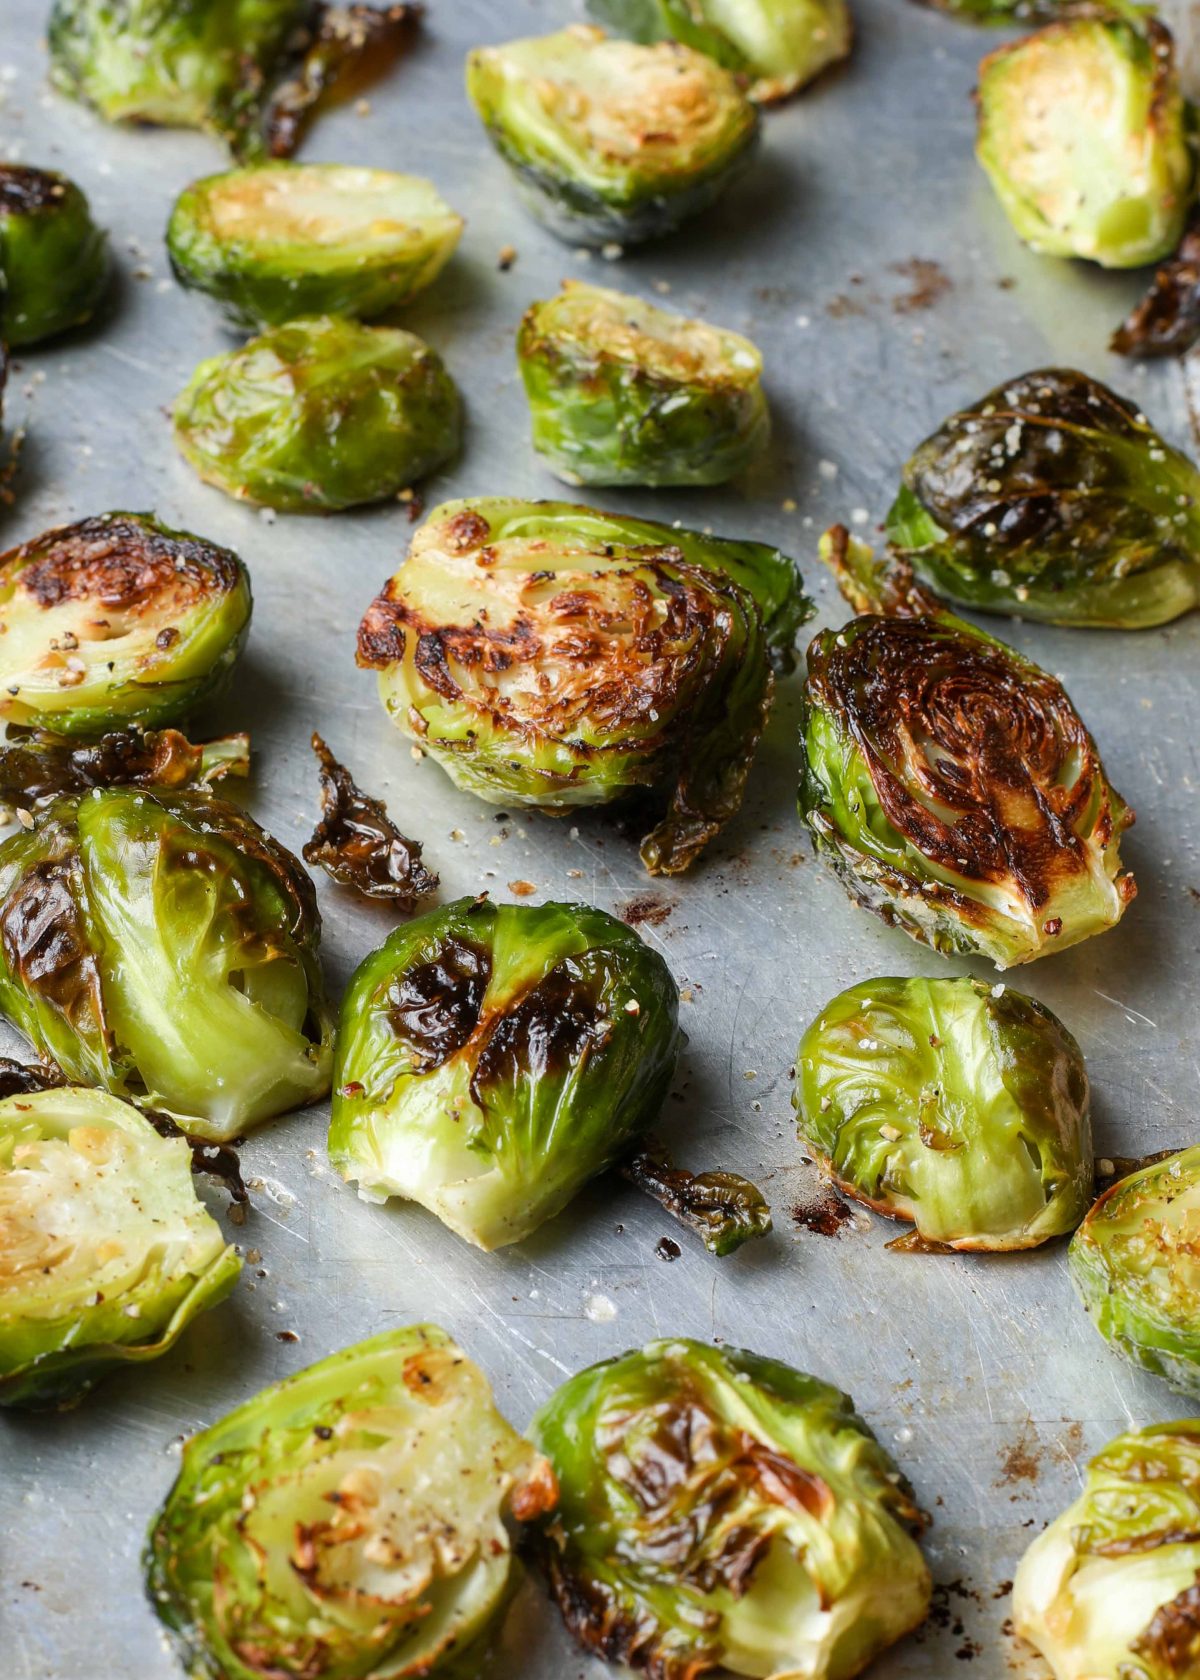 How To Roast Brussels Sprouts - Vegetable Recipes